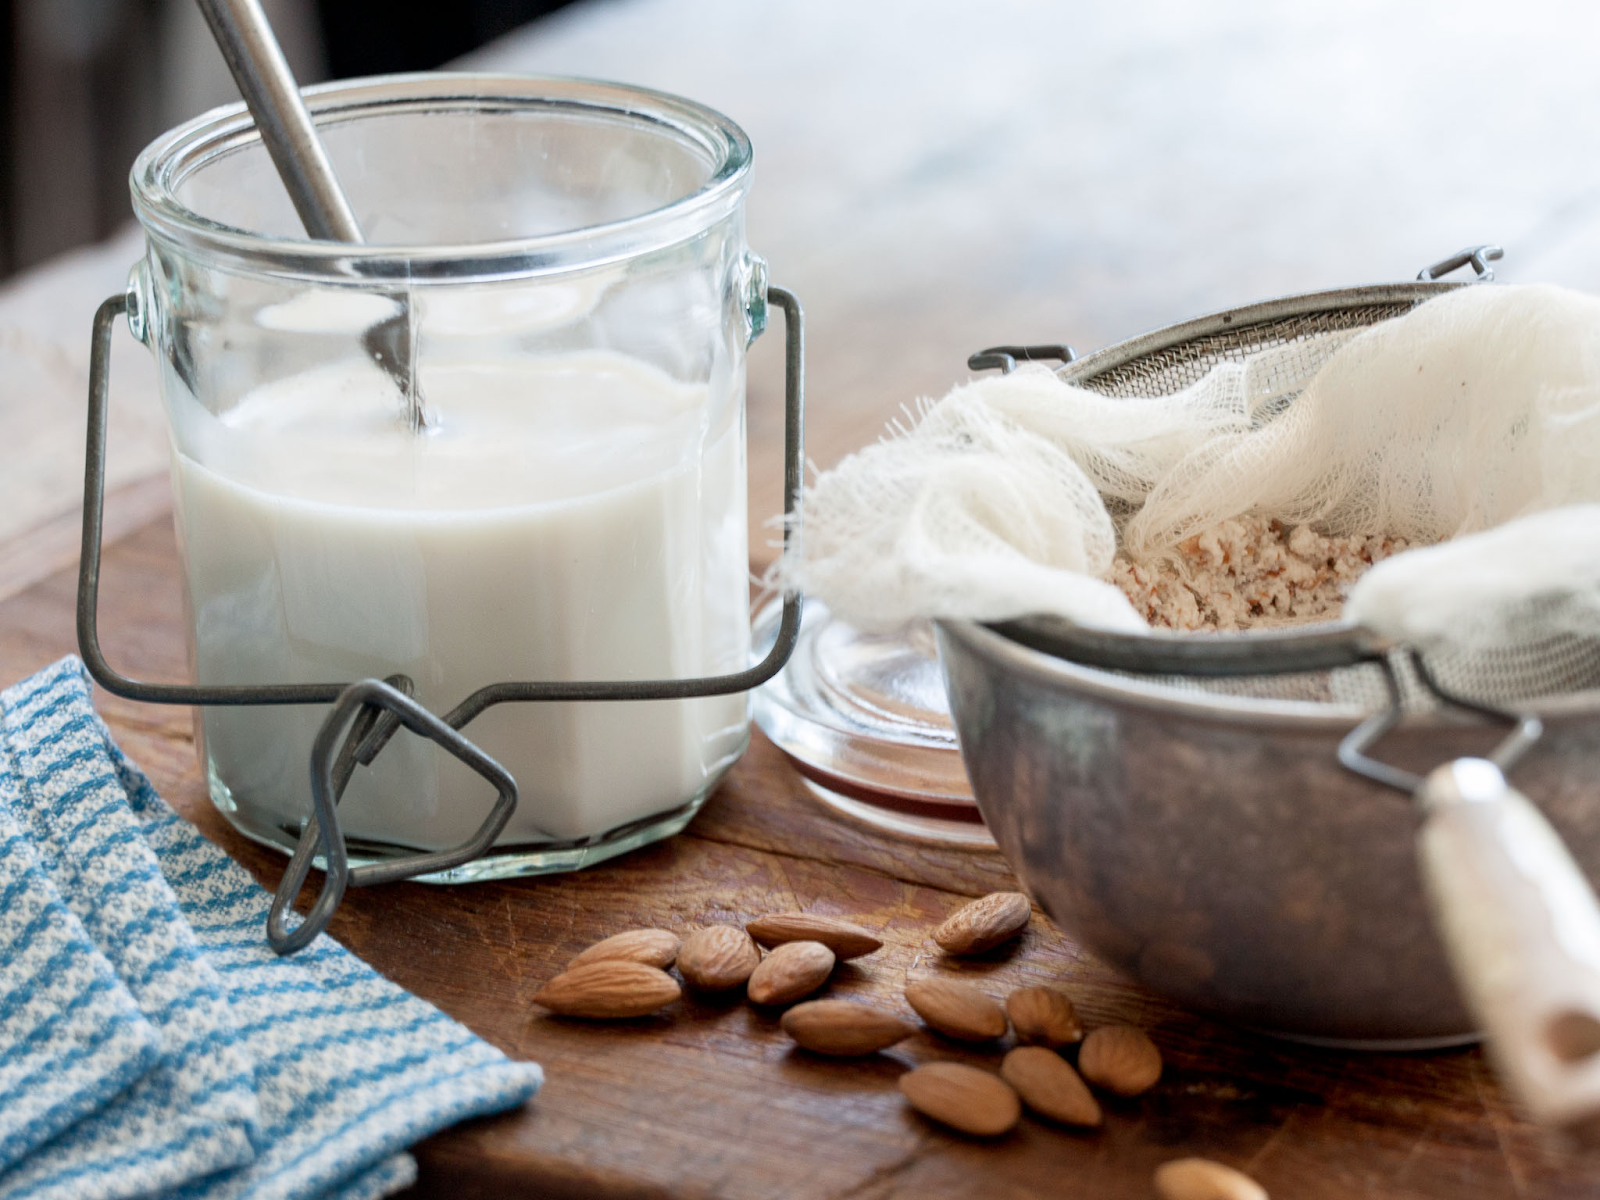 Making milk at home helps you control the quality of the finished product